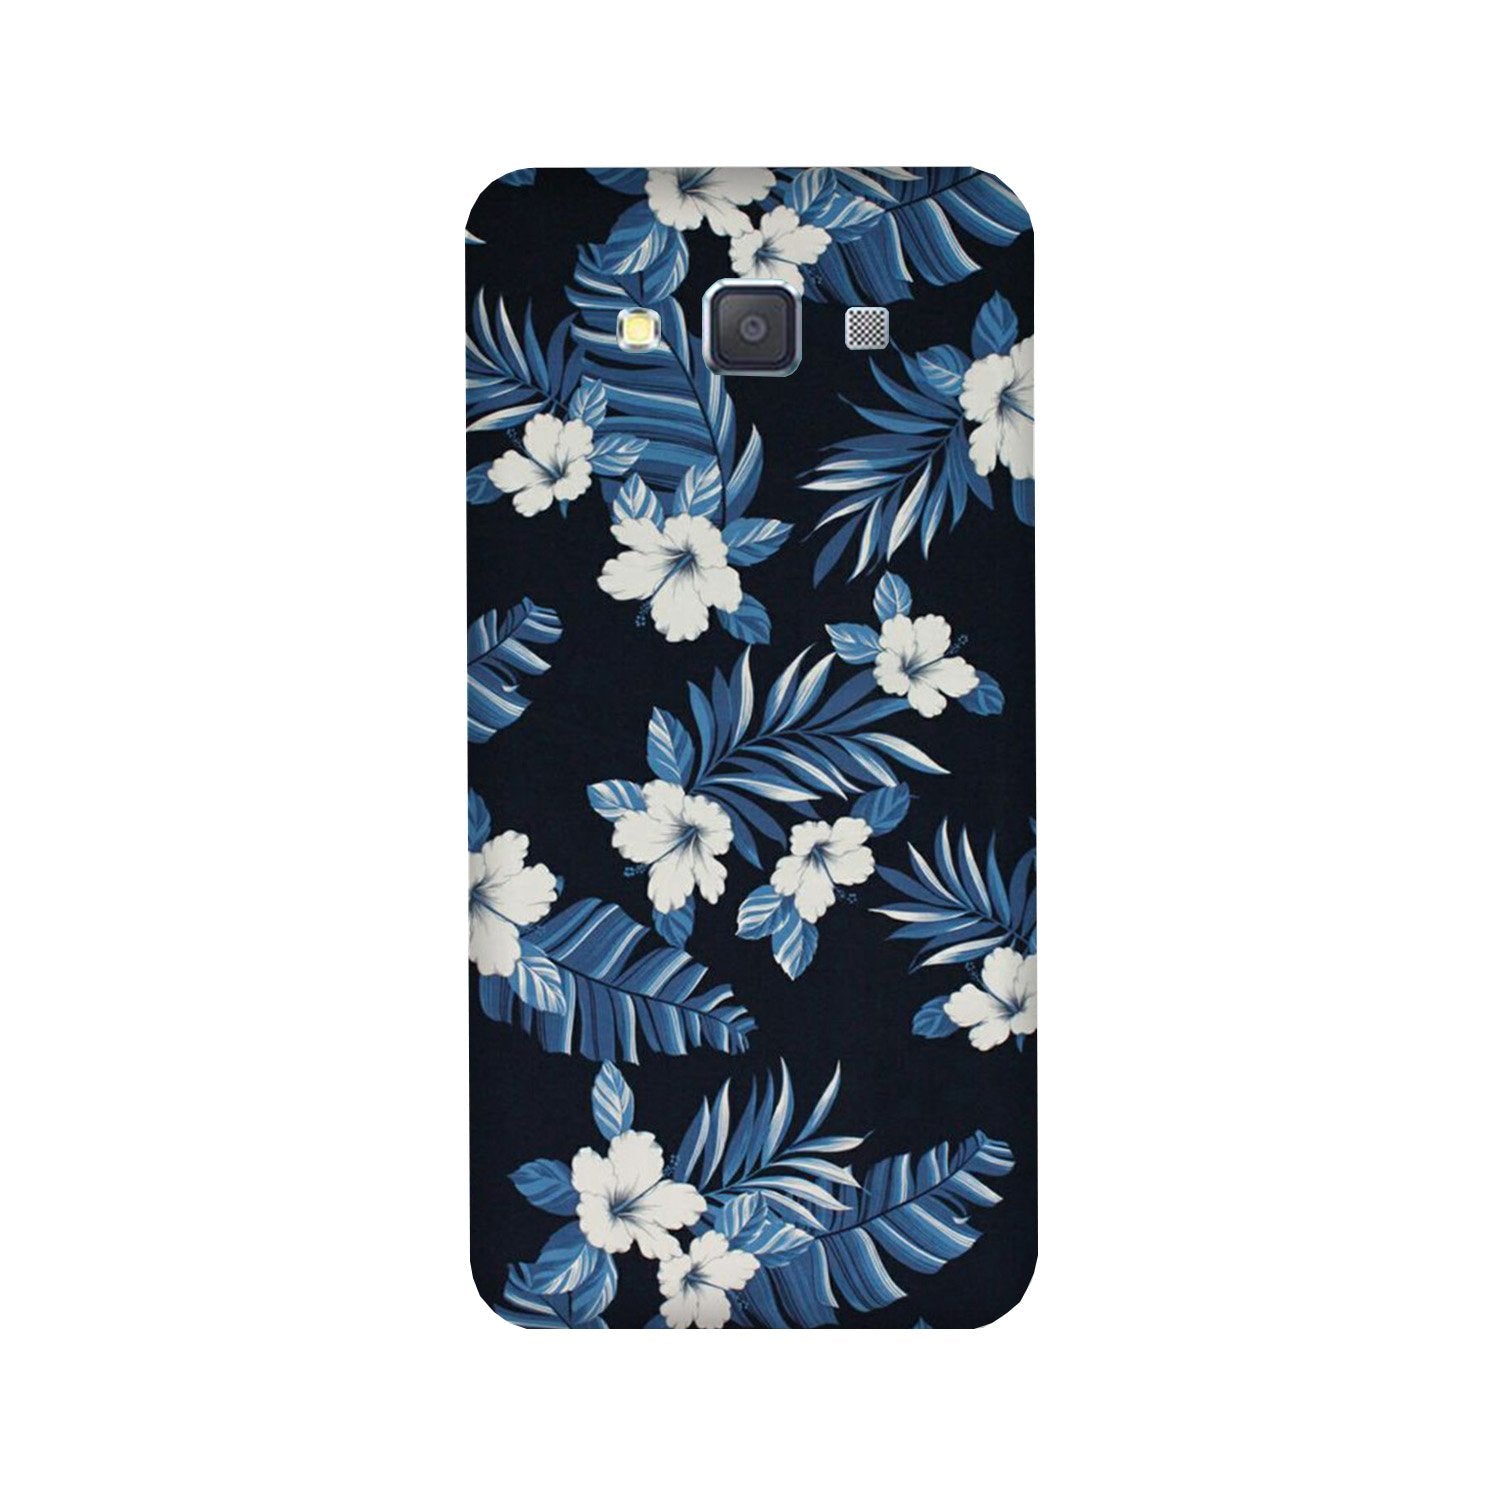 White flowers Blue Background2 Case for Galaxy A3 (2015)